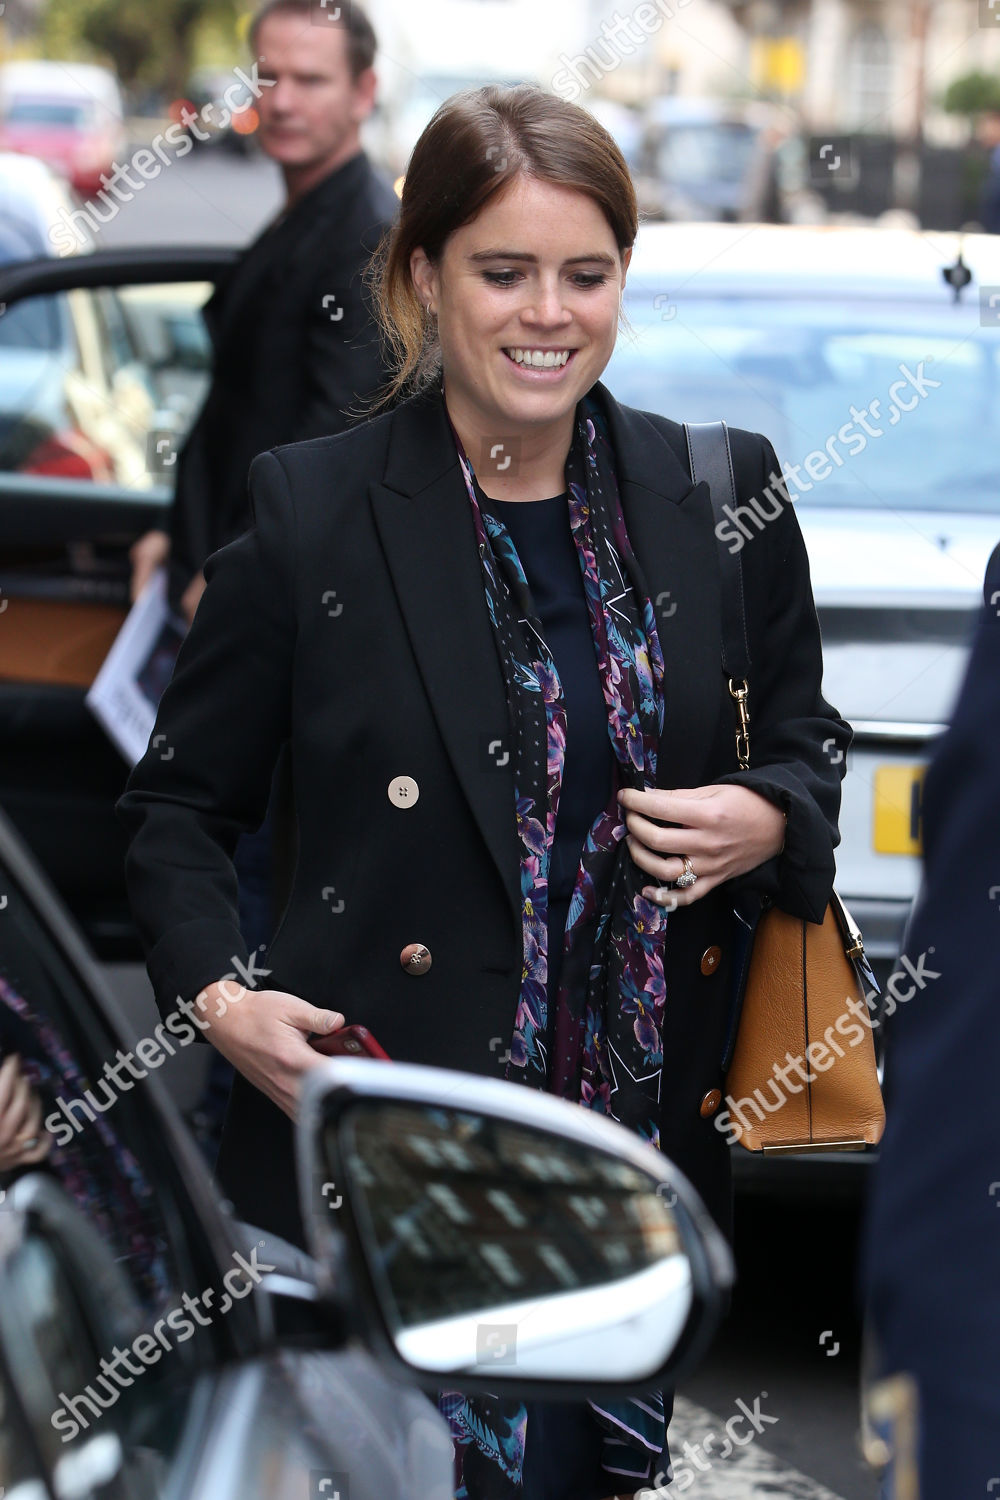 princess-eugenie-out-and-about-london-uk-shutterstock-editorial-10430670d.jpg